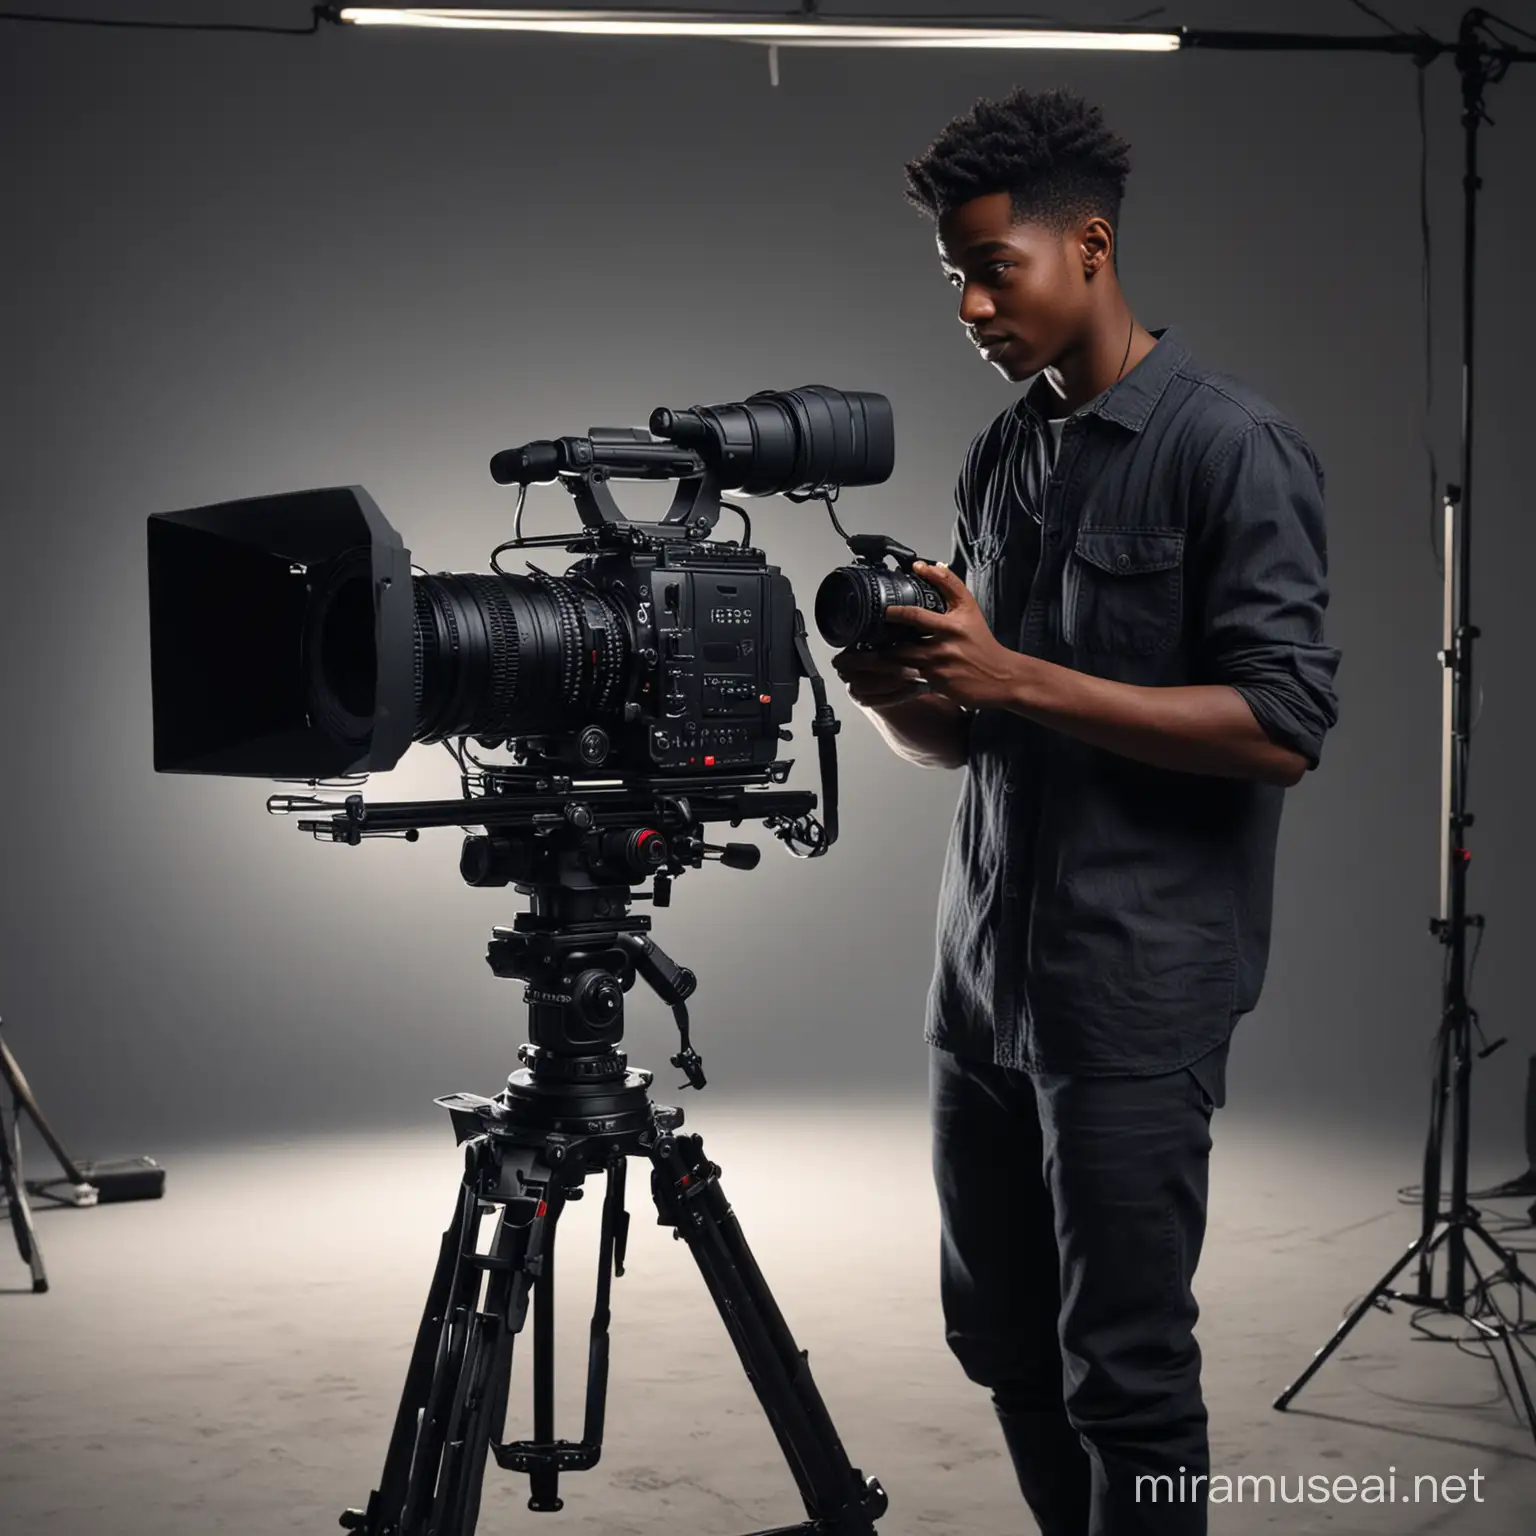 Young Black Cinematographer Filming with HighQuality Camera in Dim Studio